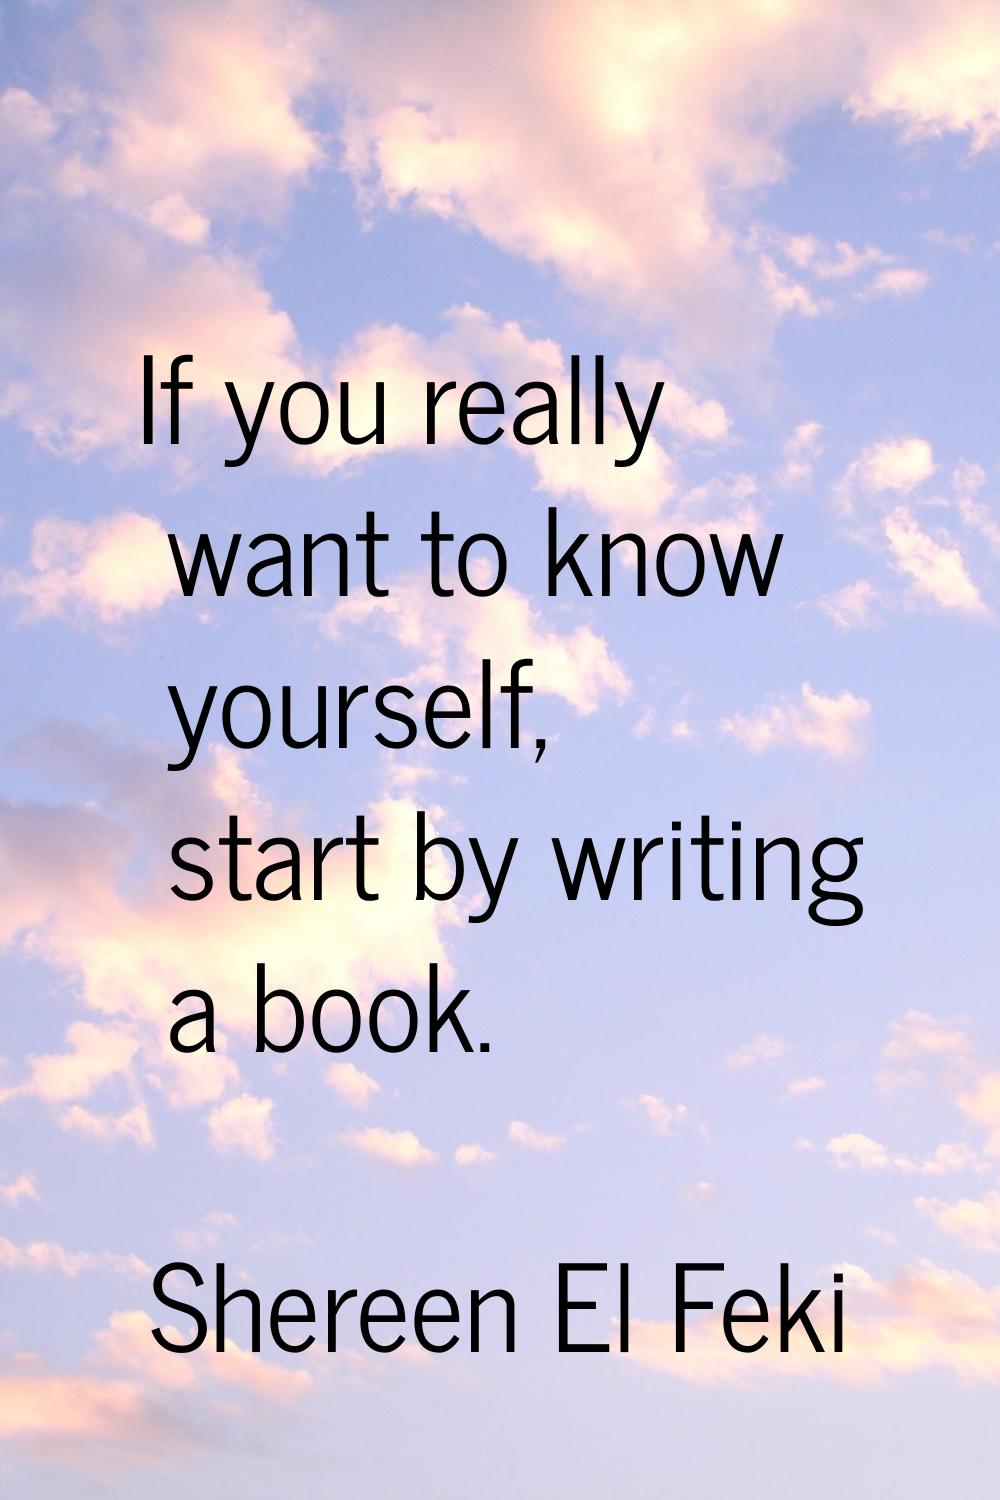 If you really want to know yourself, start by writing a book.